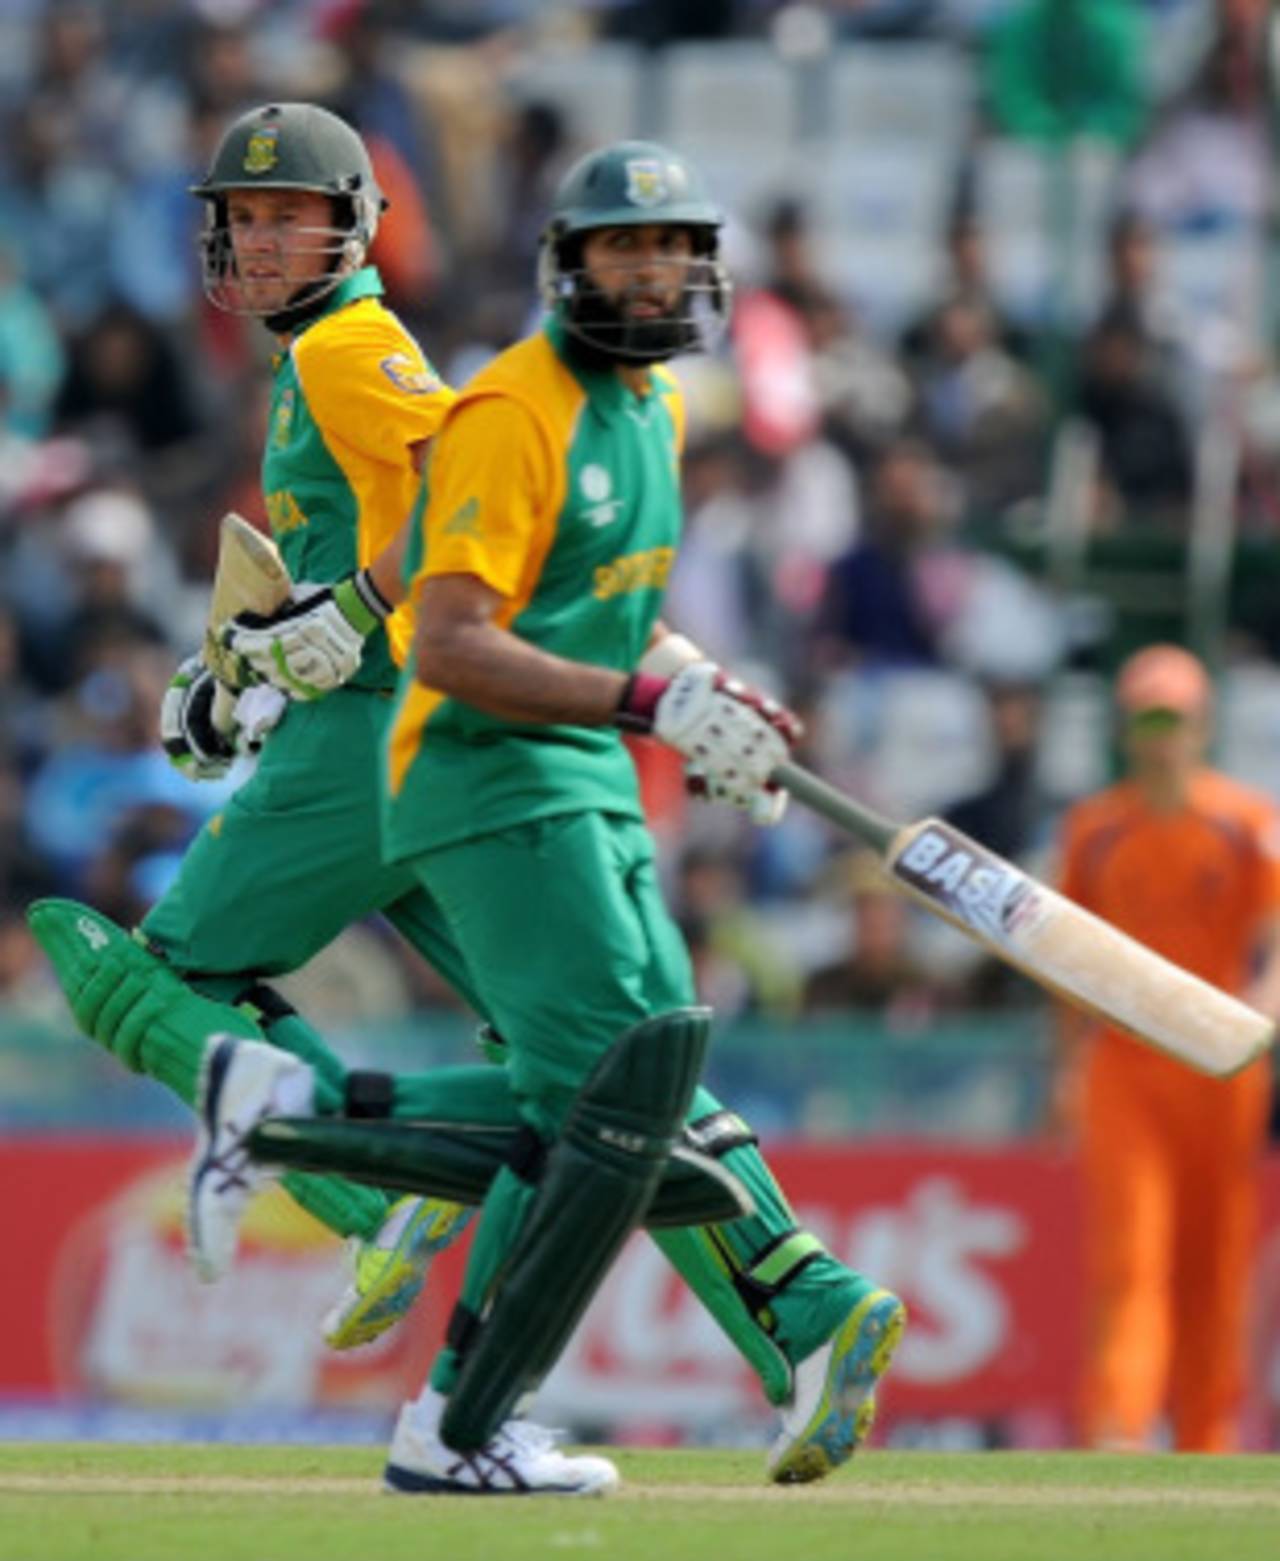 AB de Villiers and Hashim Amla take a run during their 221-run partnership, Netherlands v South Africa, World Cup 2011, Mohali, March 3, 2011